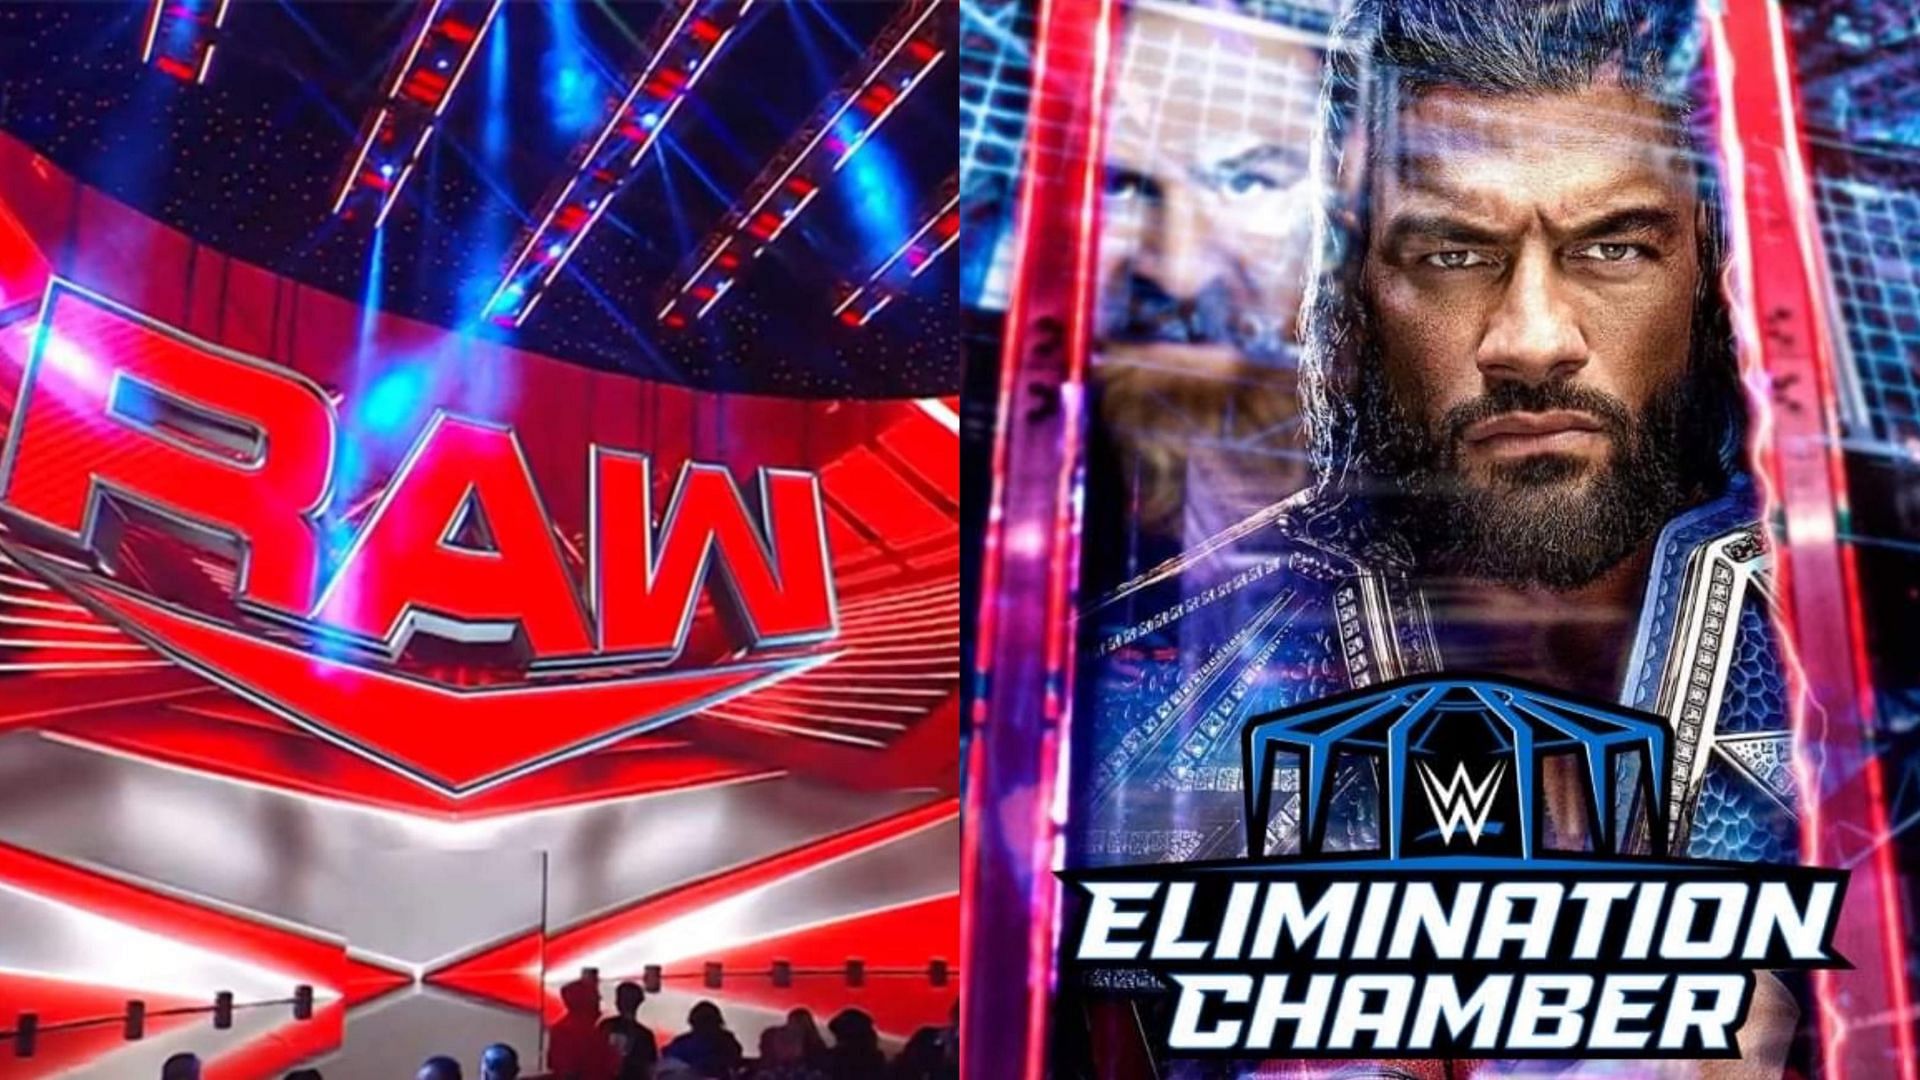 Elimination Chamber will take place on February 18th 2023.